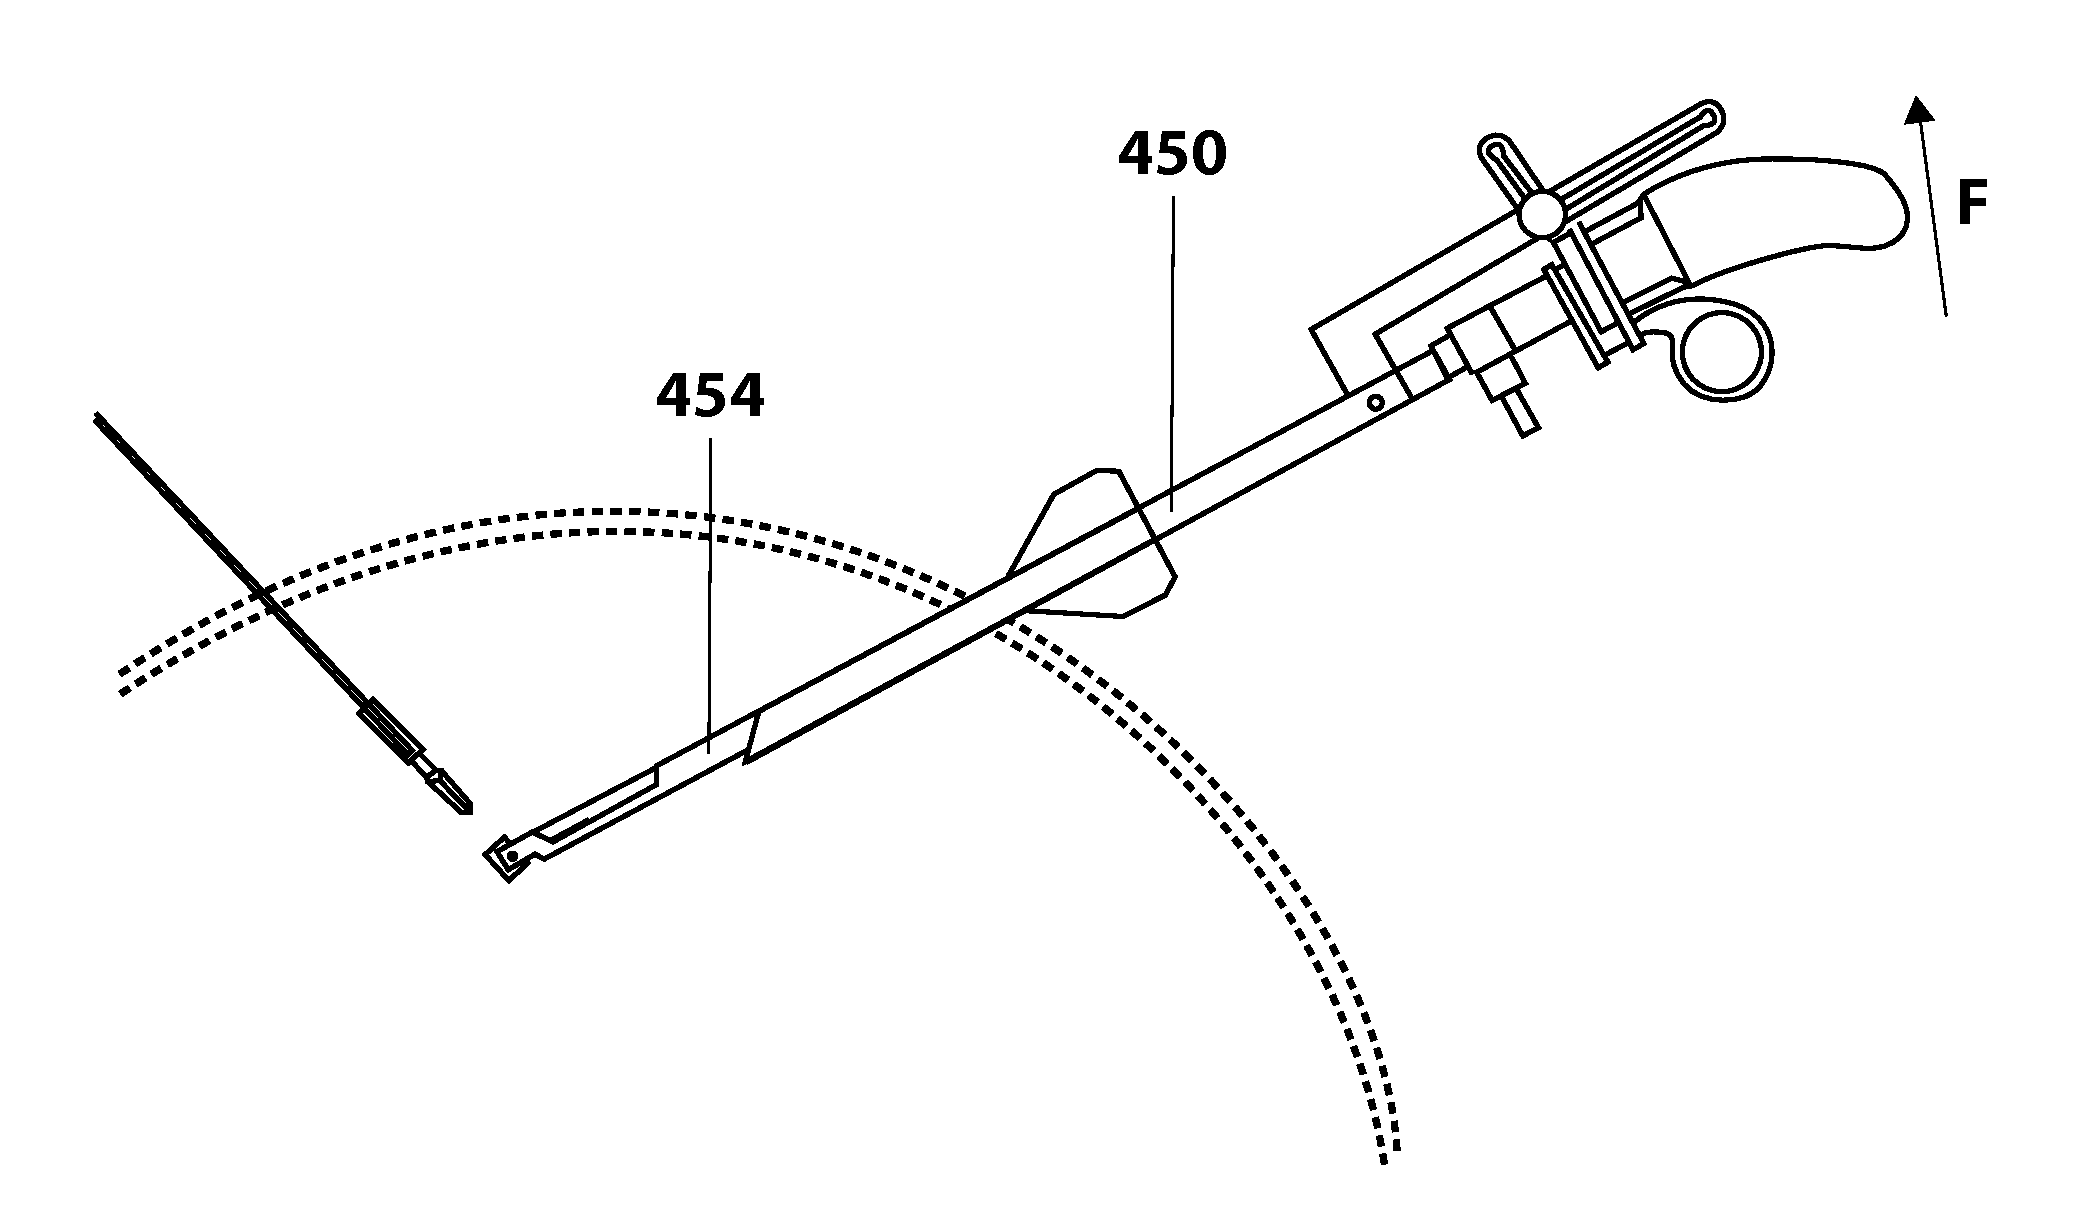 Surgical Devices, Systems and Methods